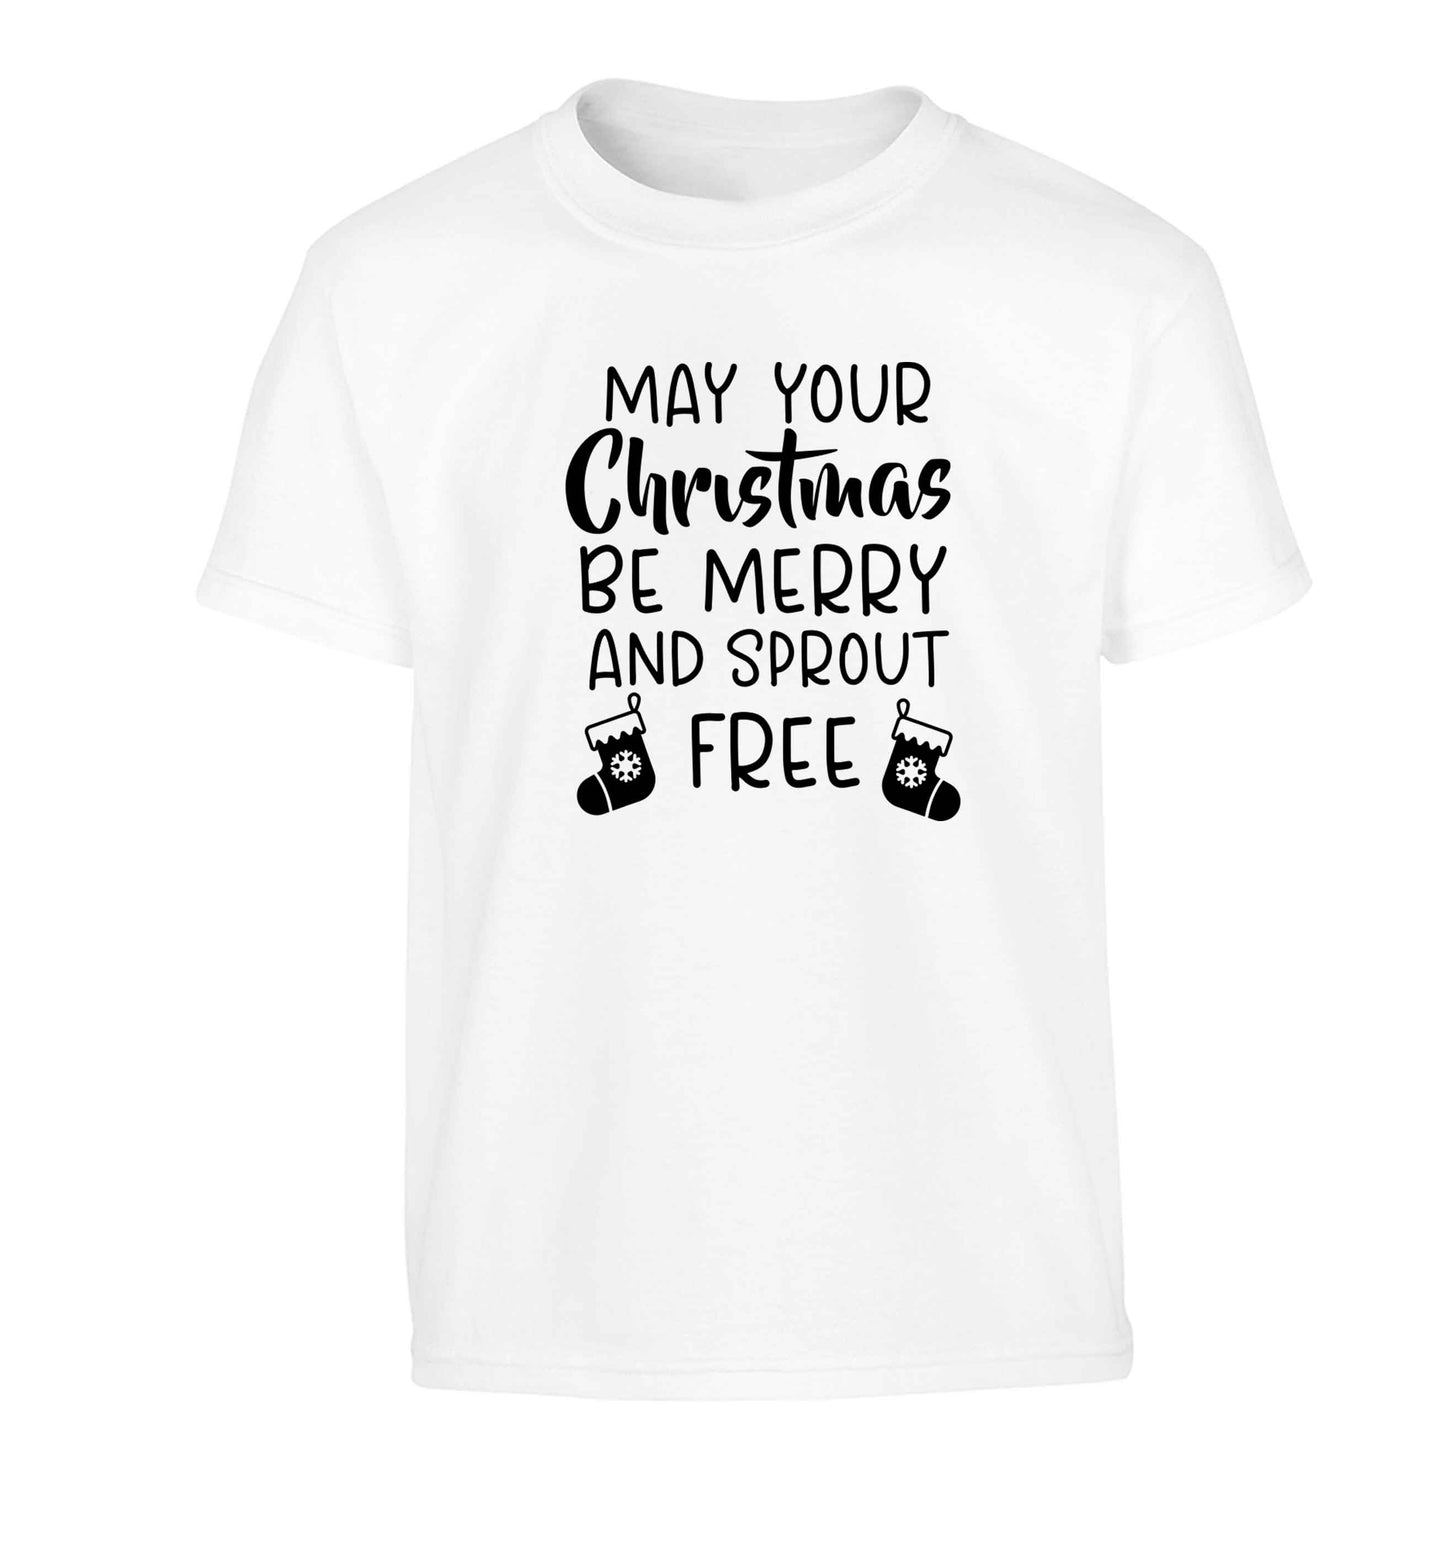 May your Christmas be merry and sprout free Children's white Tshirt 12-13 Years